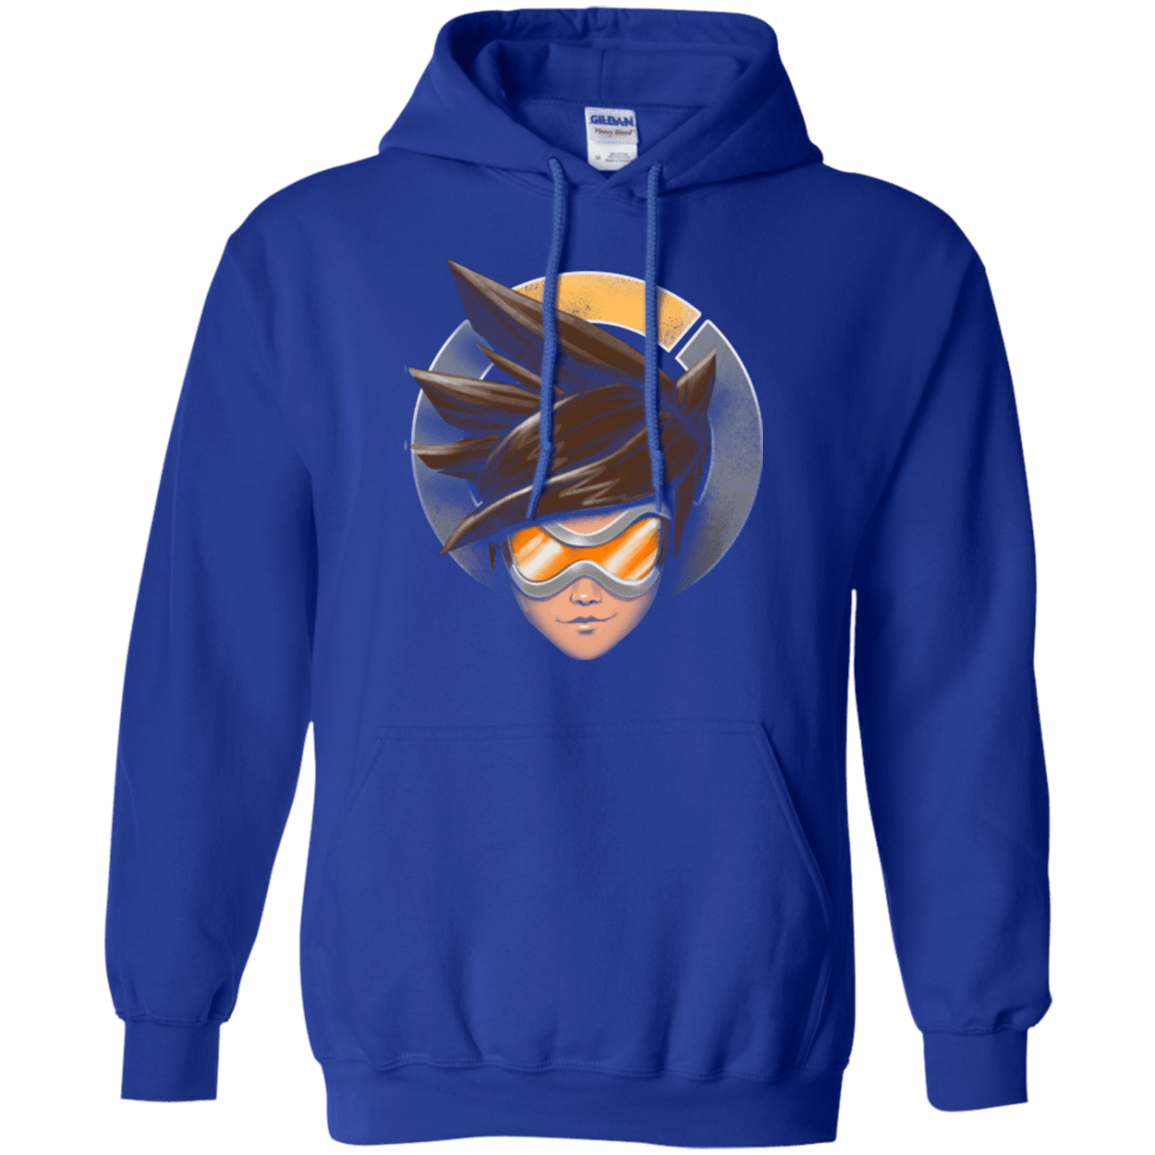 Sweatshirts Royal / Small The Jumper Pullover Hoodie